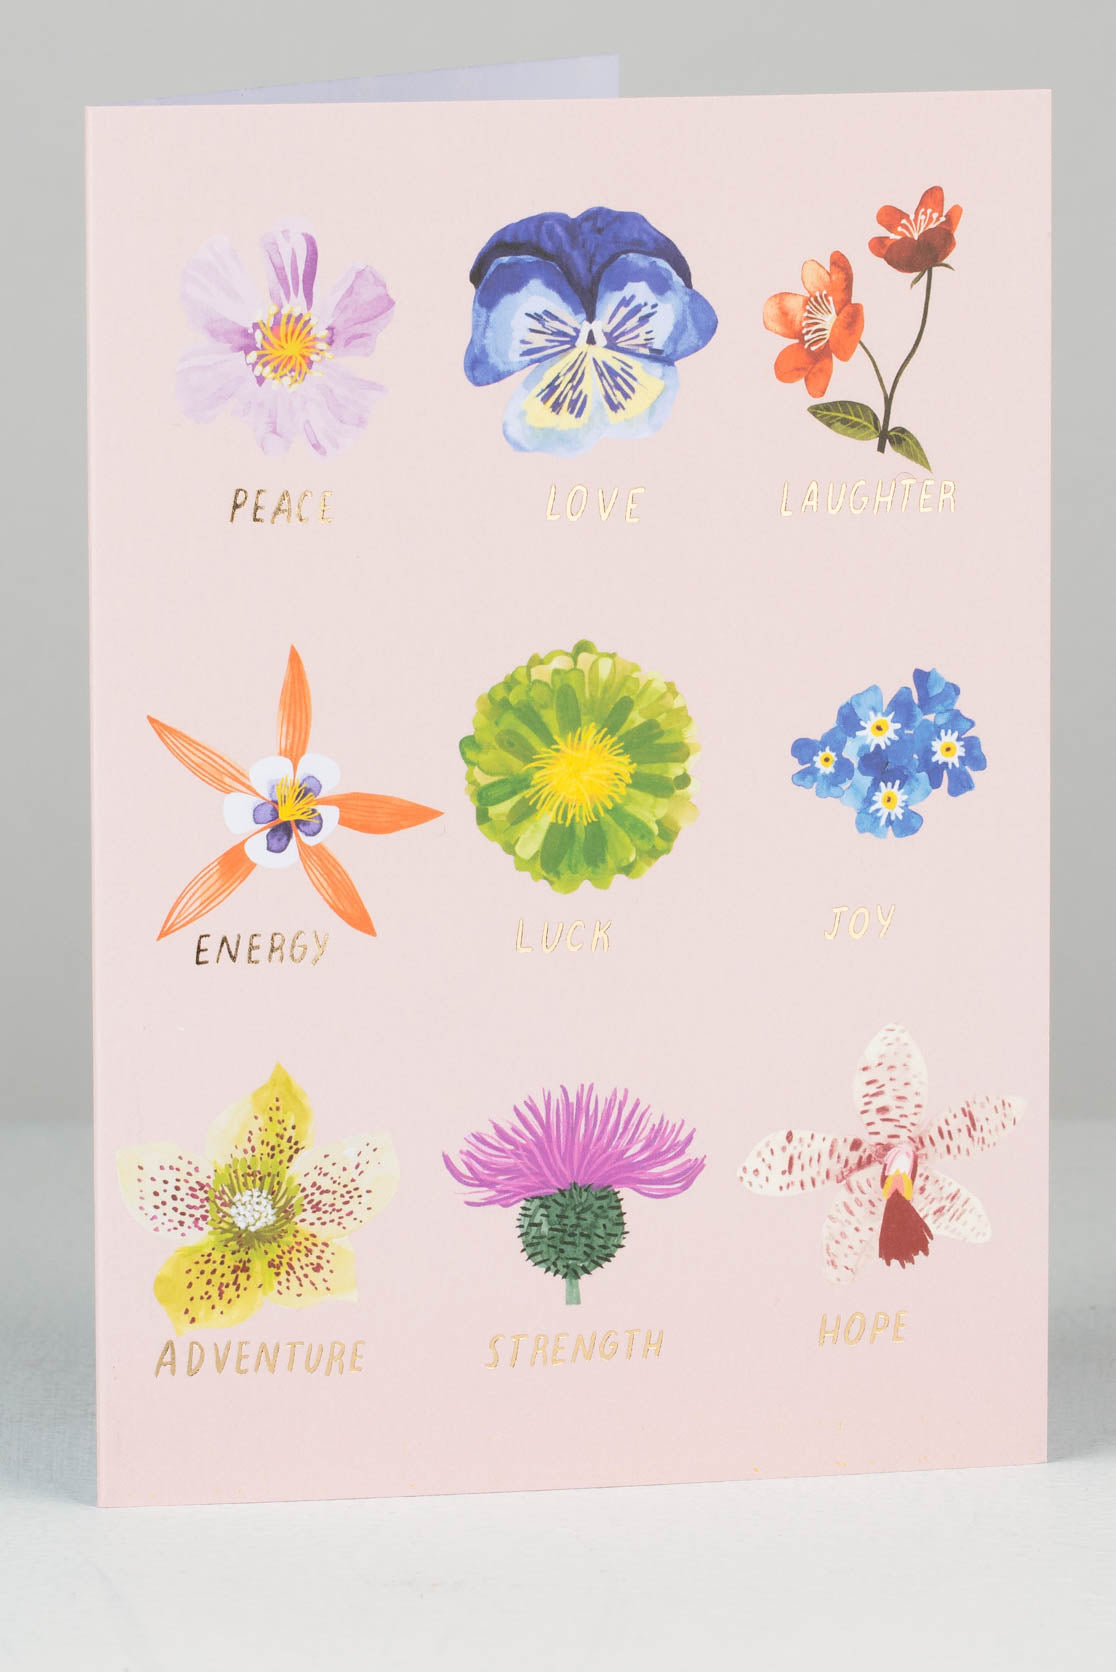 Greetings card with a pink background and illustrations of nine different flowers